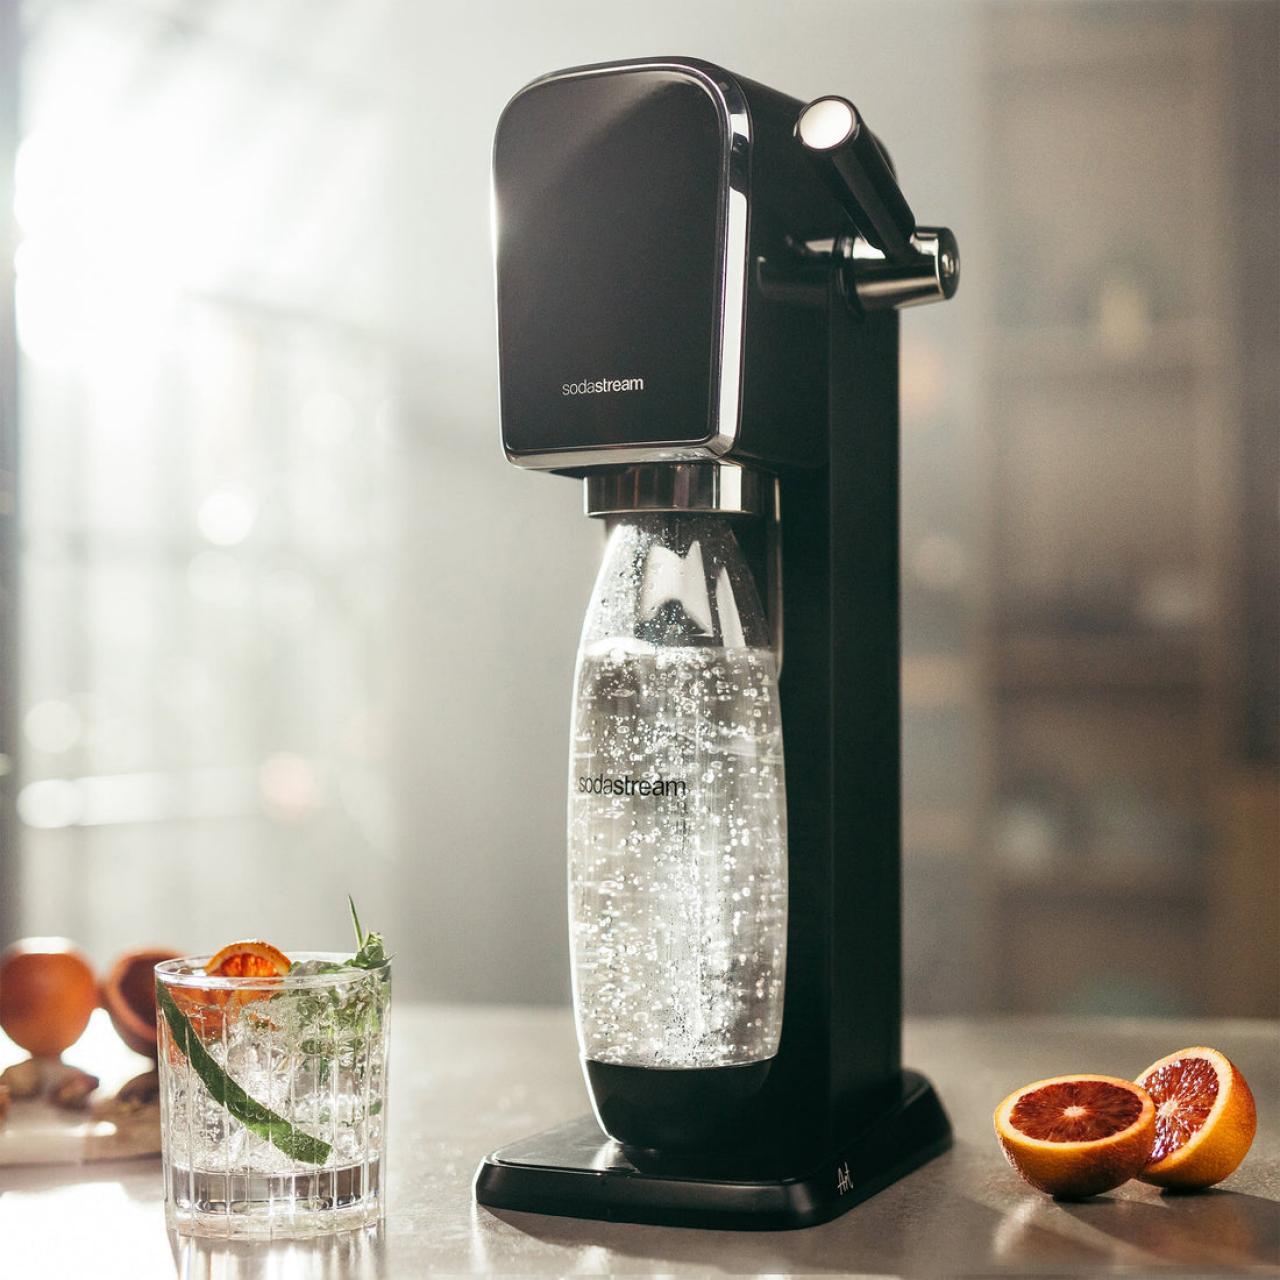 https://food.fnr.sndimg.com/content/dam/images/food/products/2022/3/10/rx_sodastream-x-dante-art-limited-edition-cocktail-kit.jpeg.rend.hgtvcom.1280.1280.suffix/1646927301294.jpeg